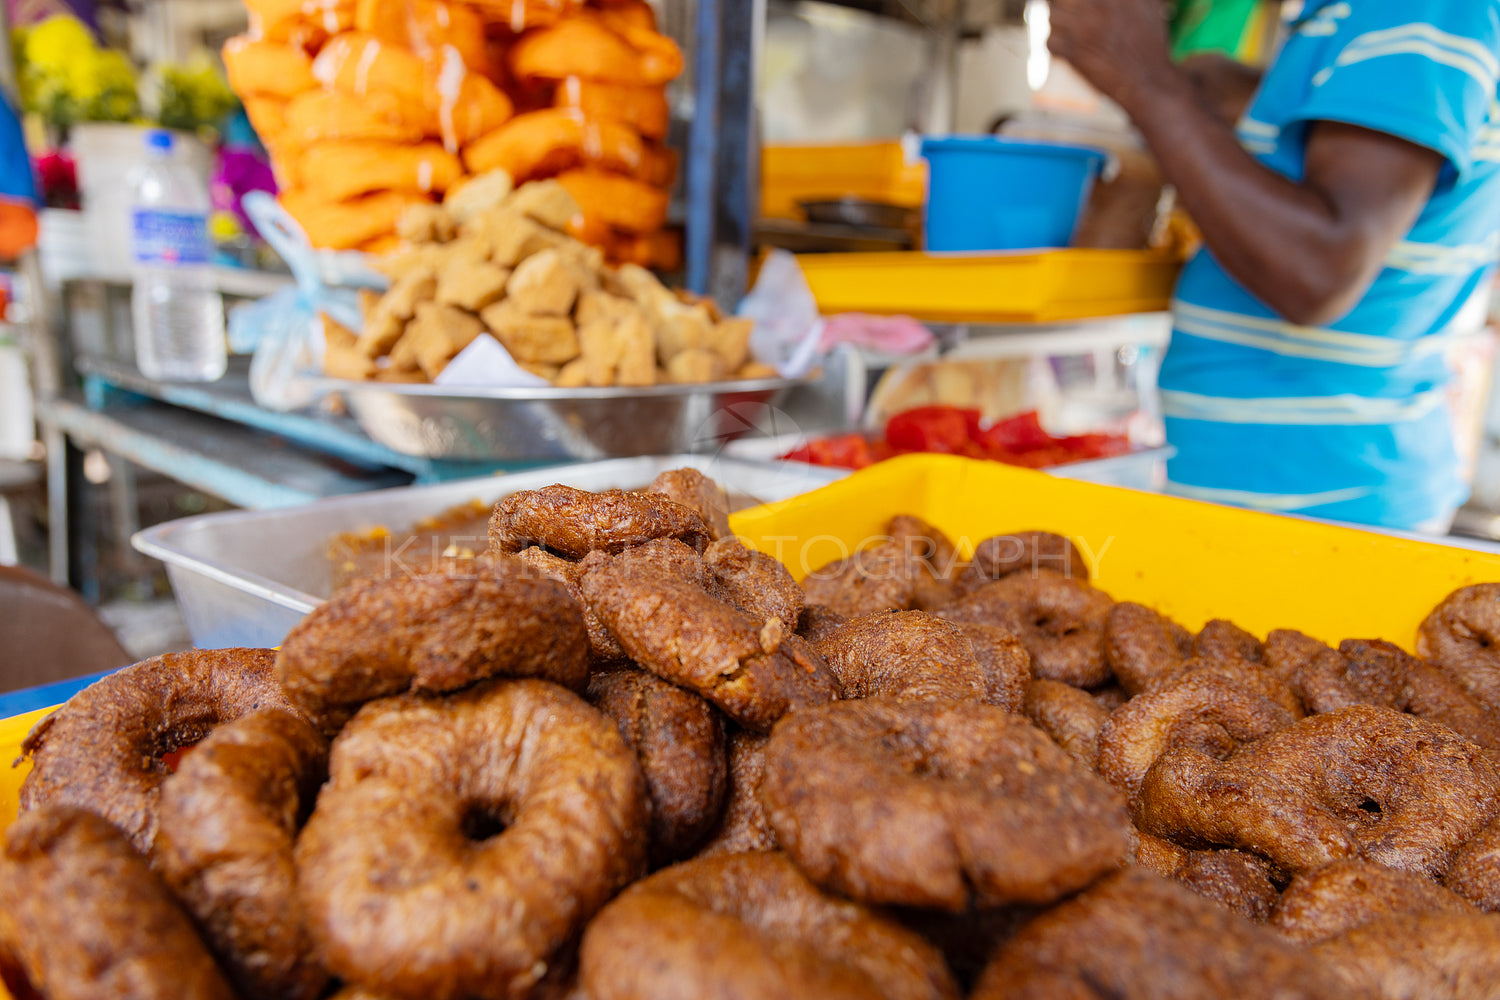 Delicious variety of fried snacks at a street food stall in Asia